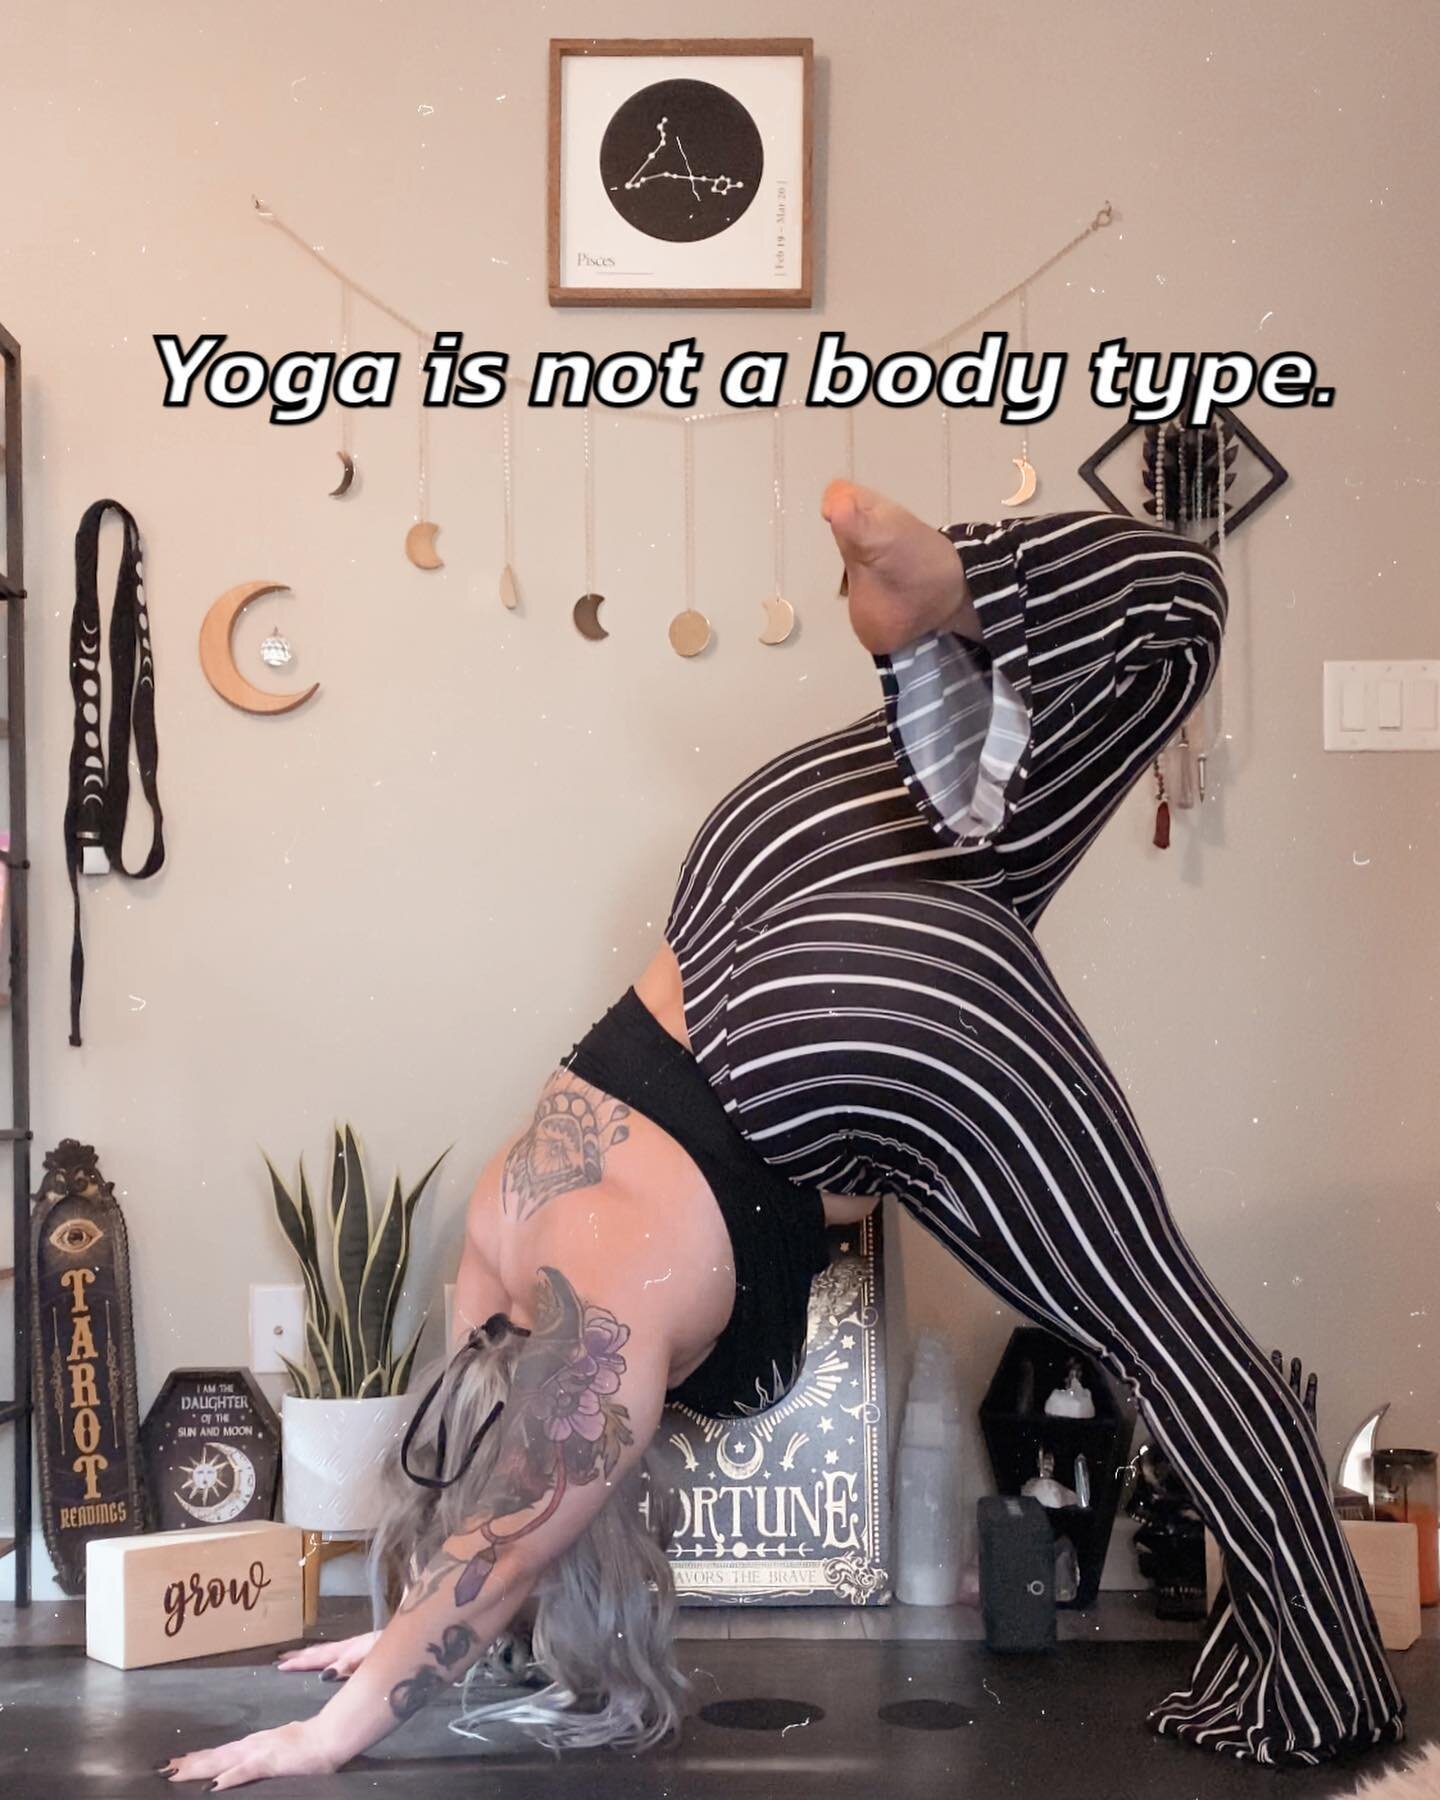 &ldquo;Unpopular&rdquo; yoga opinions? 🤷🏼&zwj;♀️⁣
⁣
It&rsquo;s odd to me that these statements might be considered unpopular or controversial.⁣
⁣
I&rsquo;ve been seeing posts, yoga classes on YouTube and various ads lately using yoga as a weight lo